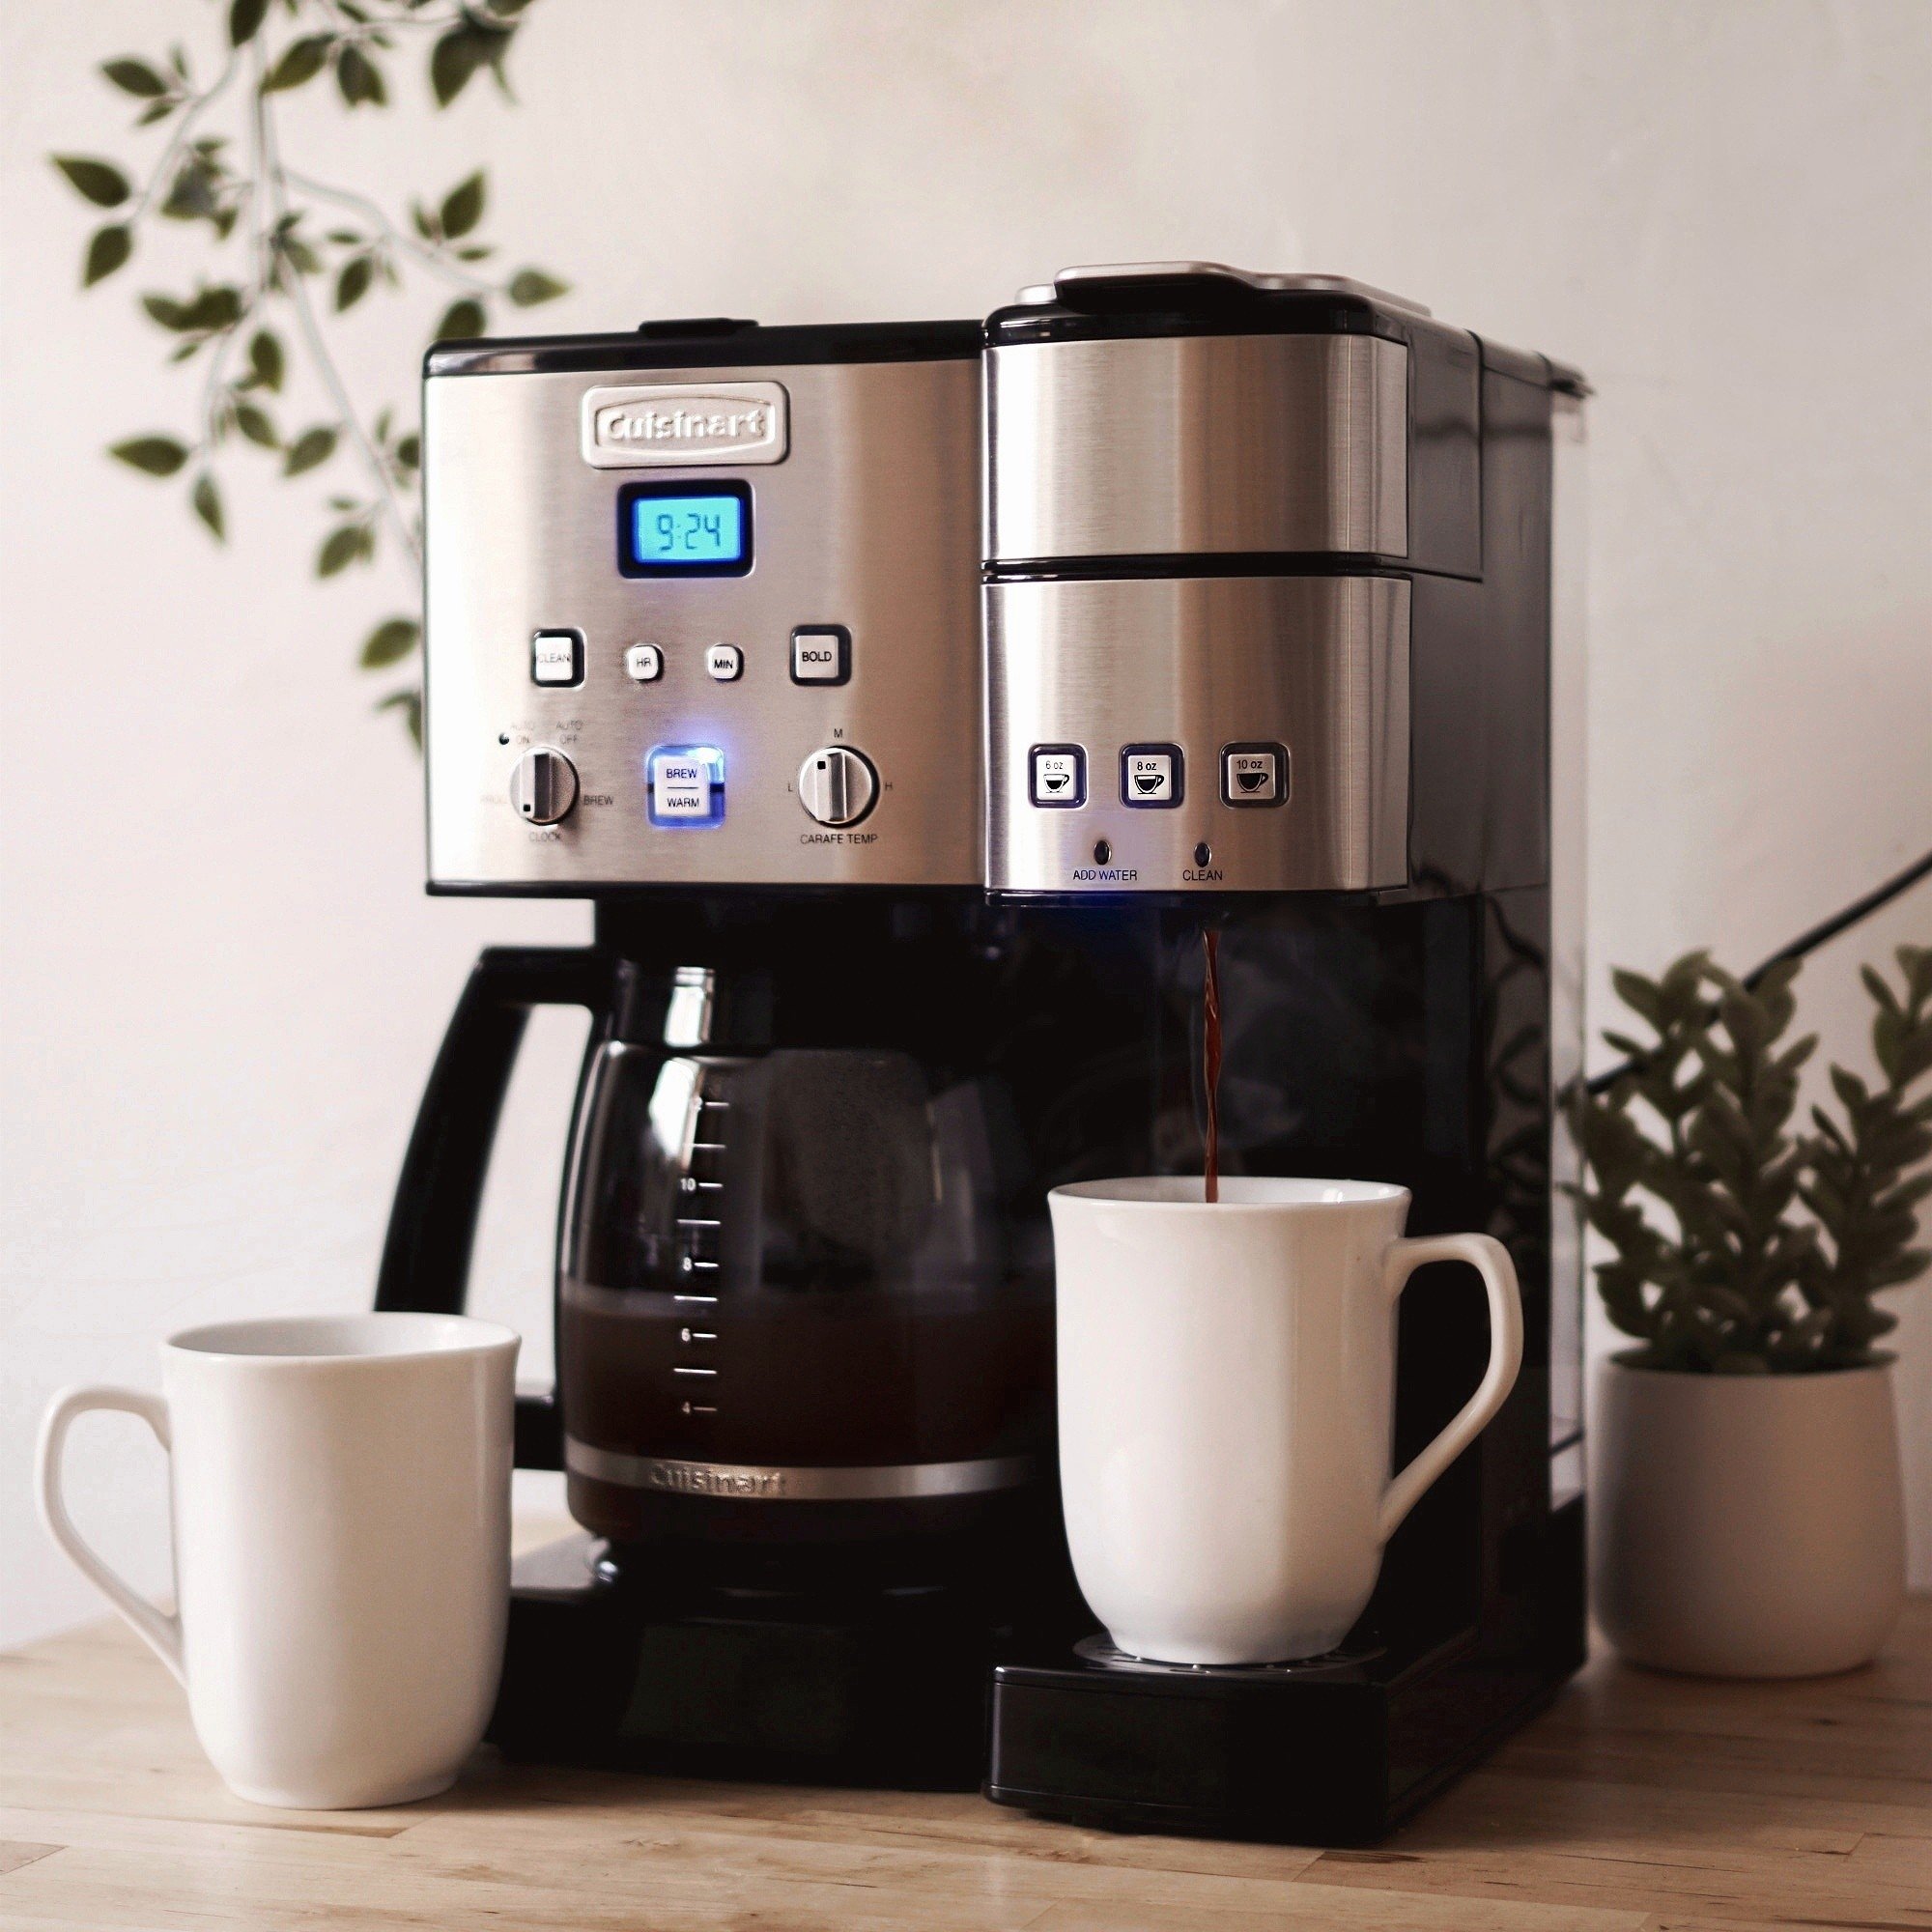 Never run out of coffee☕ Make carafes (that stay hot!) for brunch guests  with the Coffee Center 2-in-1 Coffeemaker.